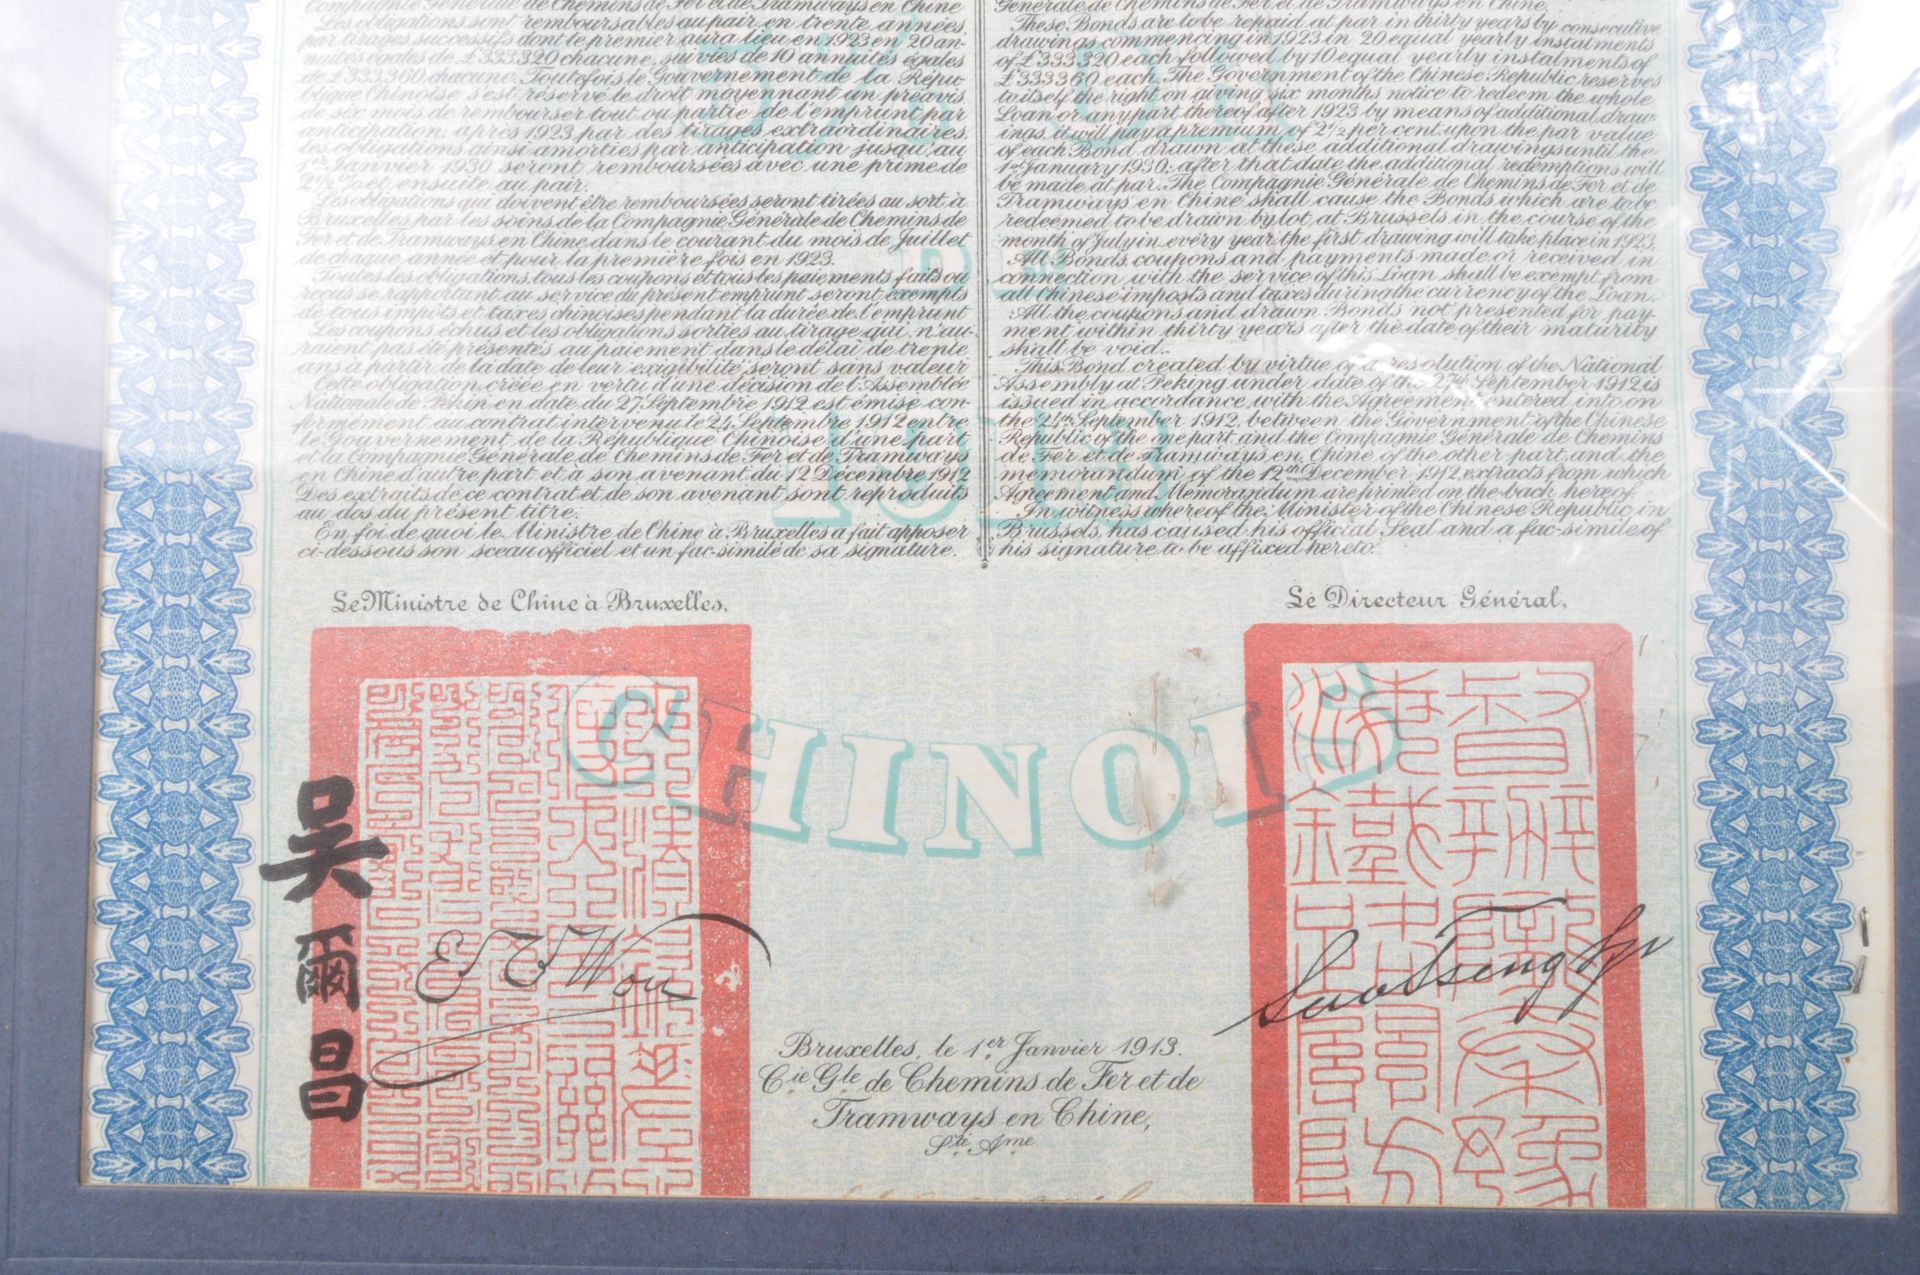 EARLY 20TH CENTURY CHINESE REPUBLIC PERIOD RAILWAY BOND - Image 3 of 5